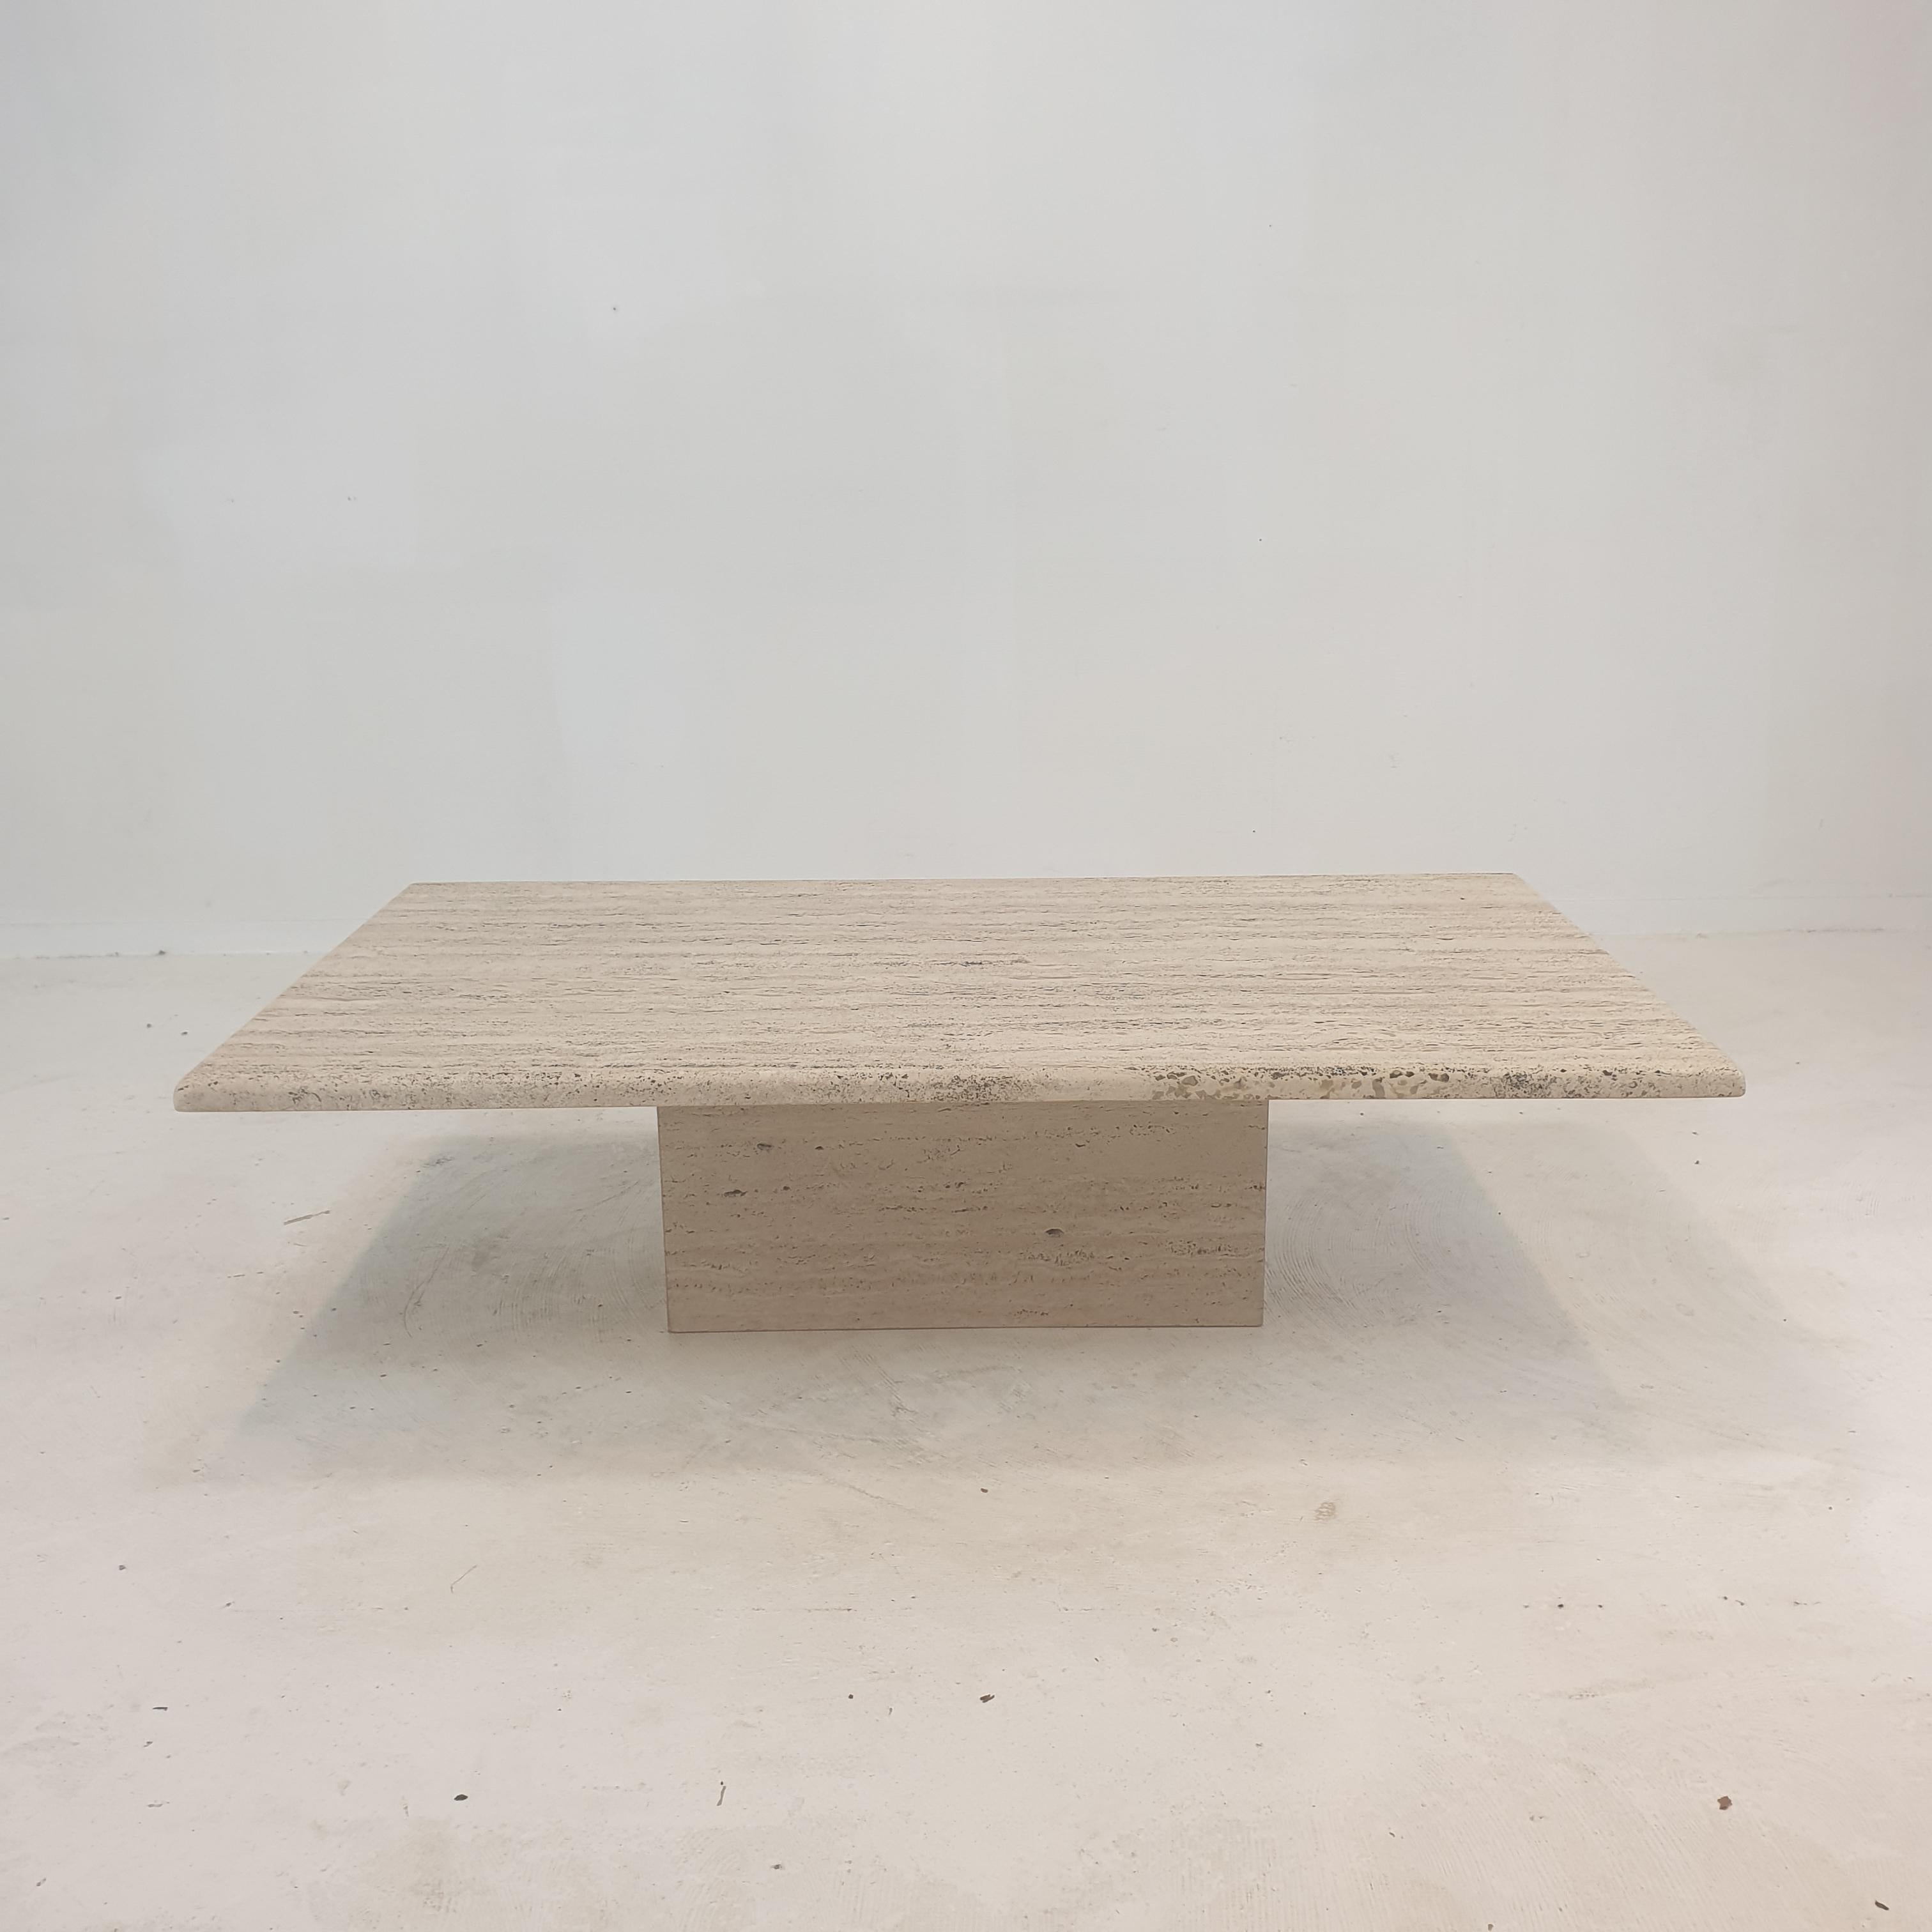 Very nice Italian coffee table handcrafted out of travertine, 1980's.

The beautiful rectangle top is rounded on the edge. 
It is made of beautiful rough travertine.

It has the normal traces of use, see the pictures.

We work with professional